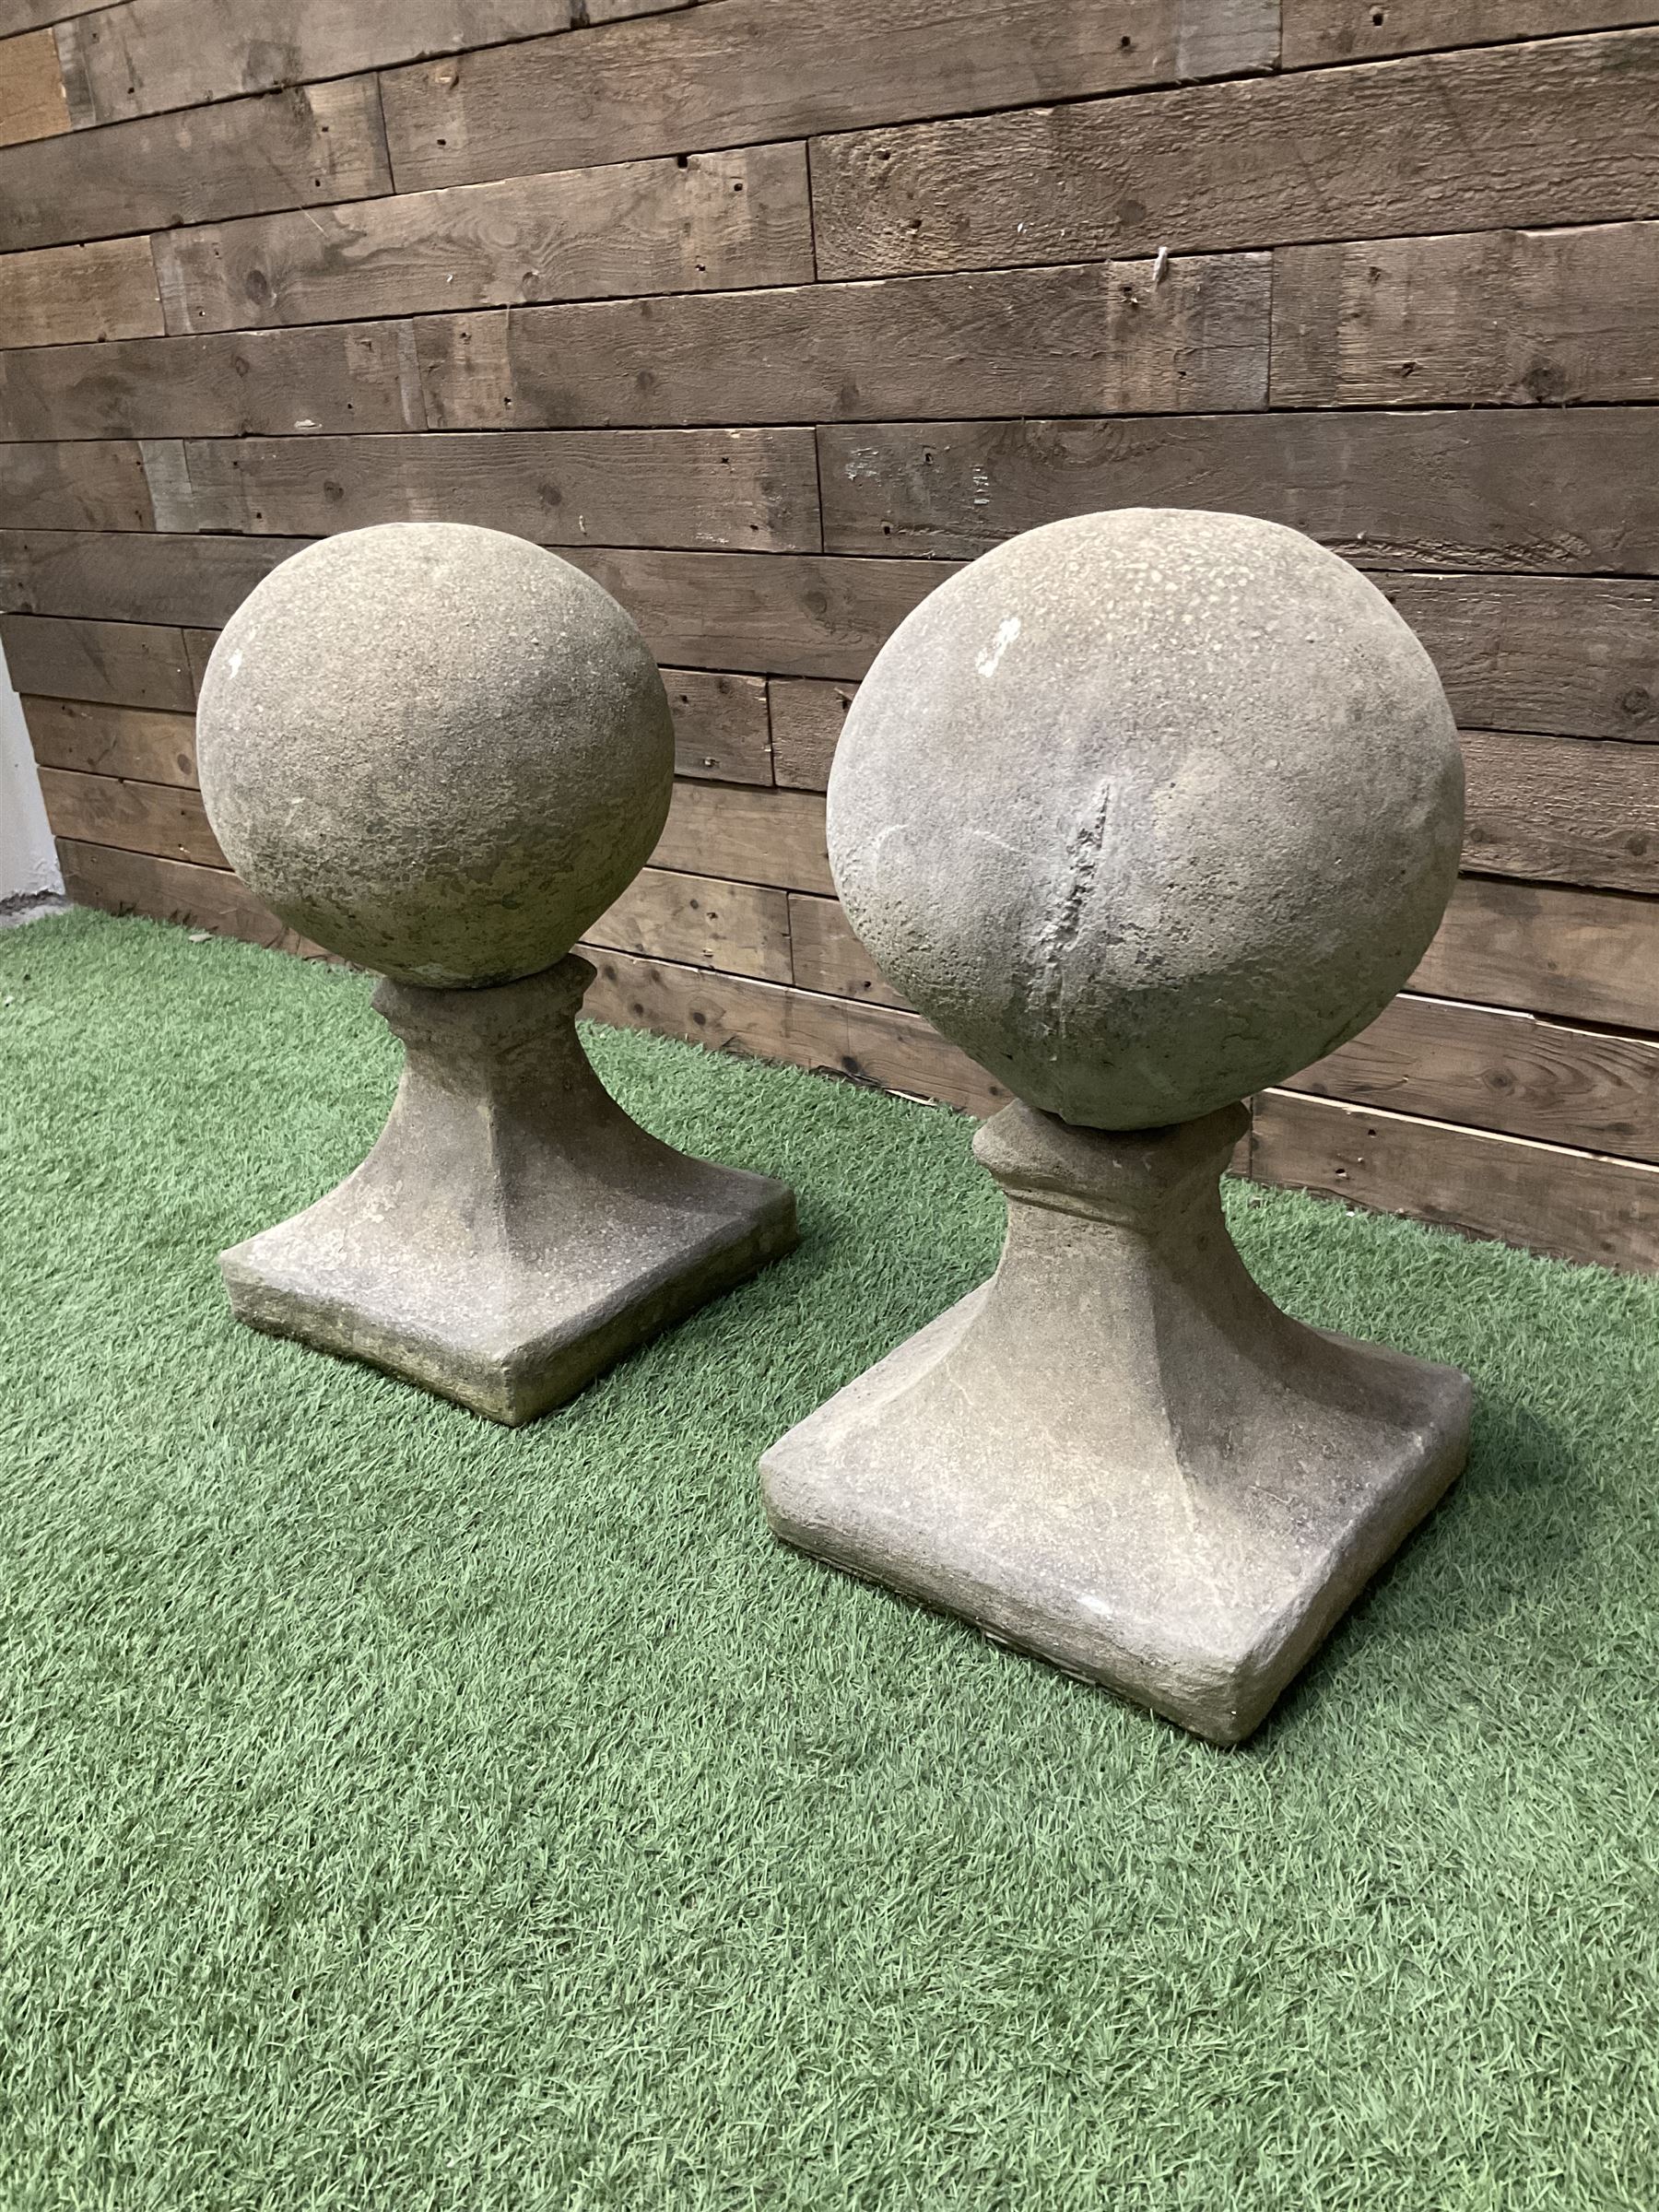 Pair of cast stone garden spherical ball finials or gatepost tops - Image 2 of 3